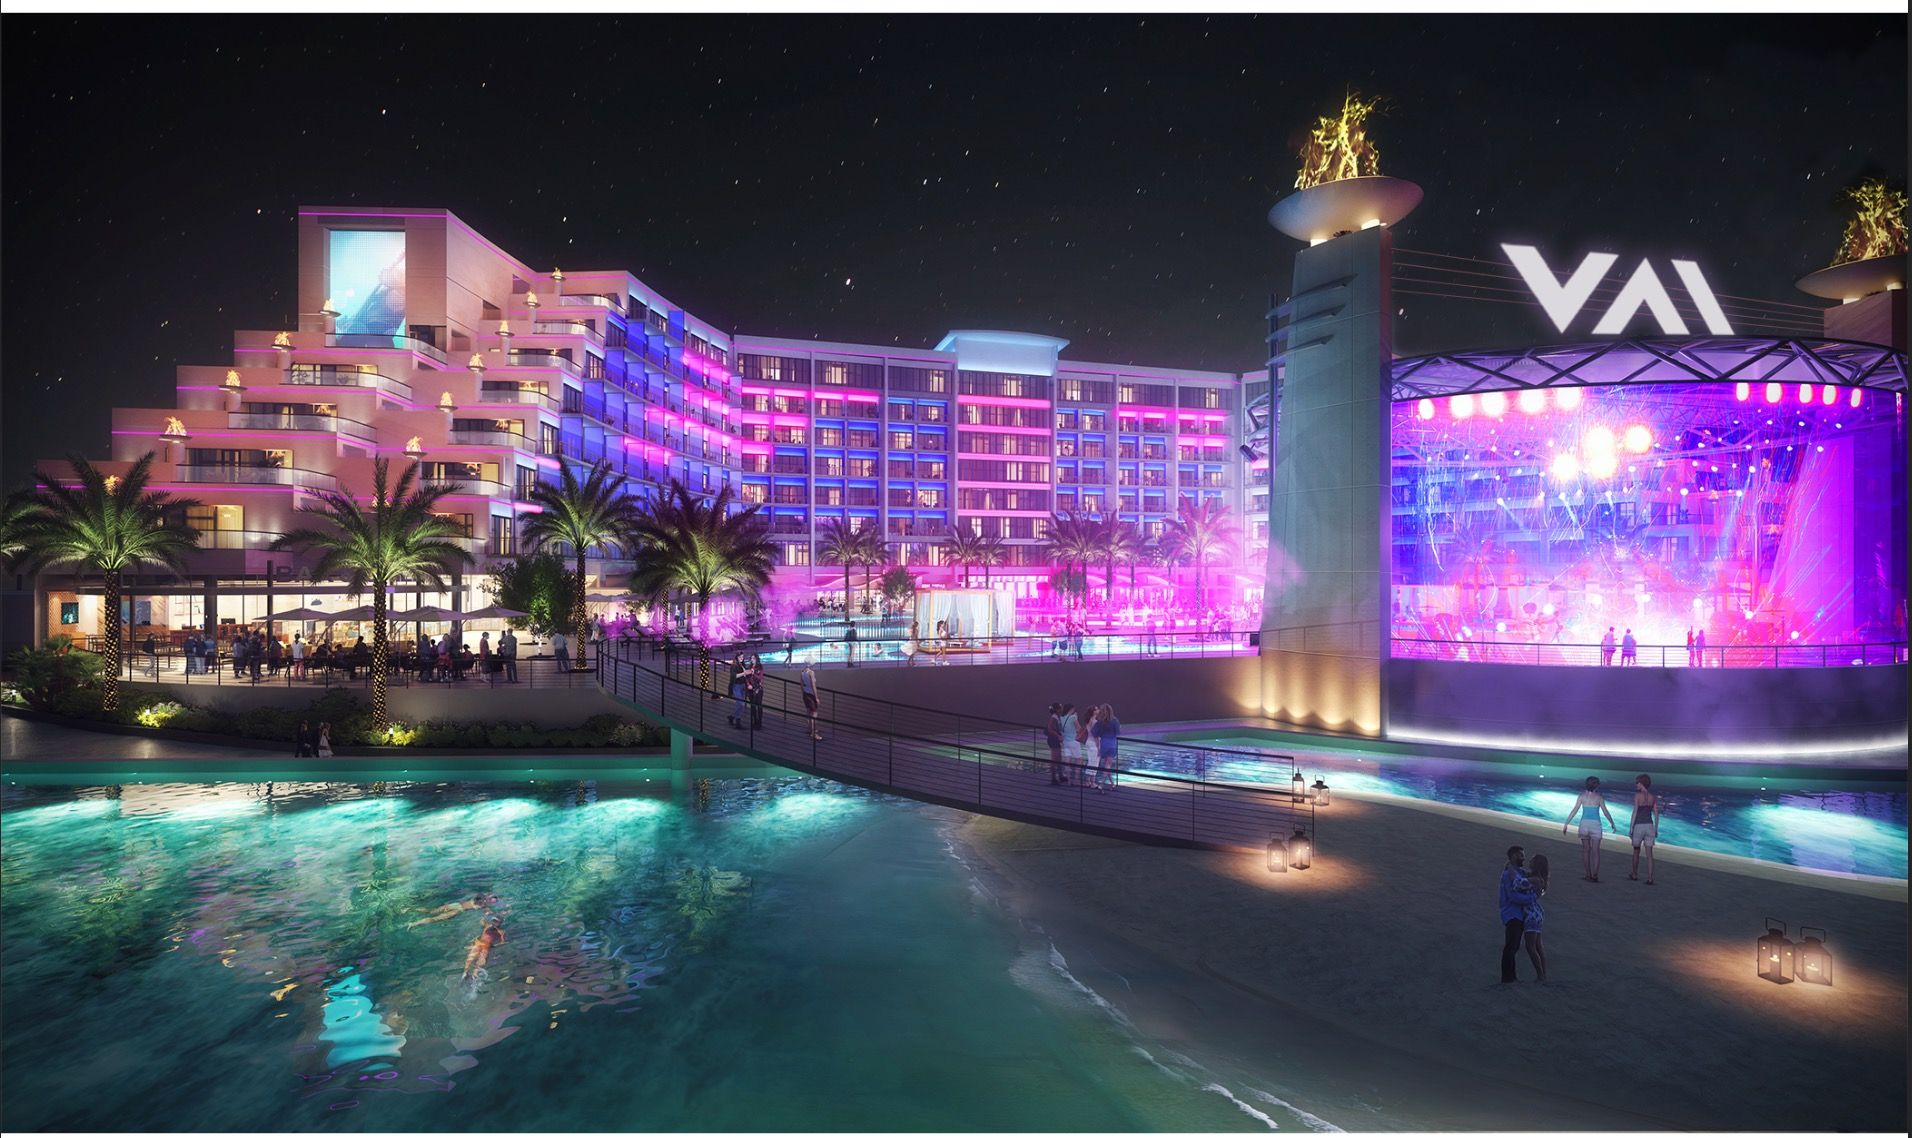 An artist's rendering of a proposed hotel and resort lite up with pink and purple lights at night